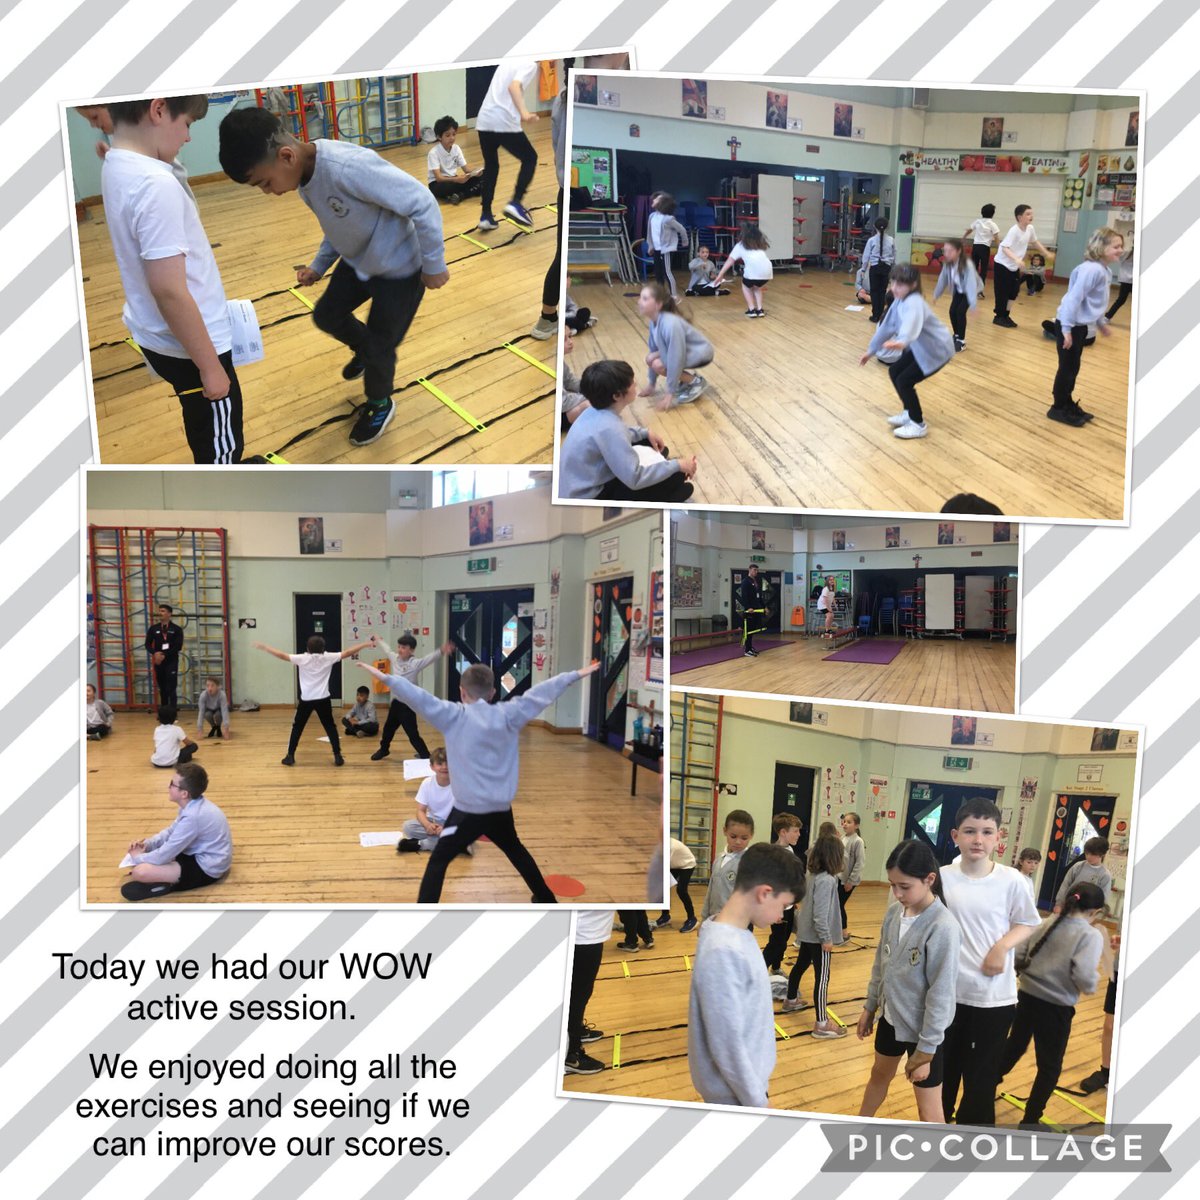 Our final WOW active session was today. We have loved comparing our scores and trying to improve them. We love to exercise!